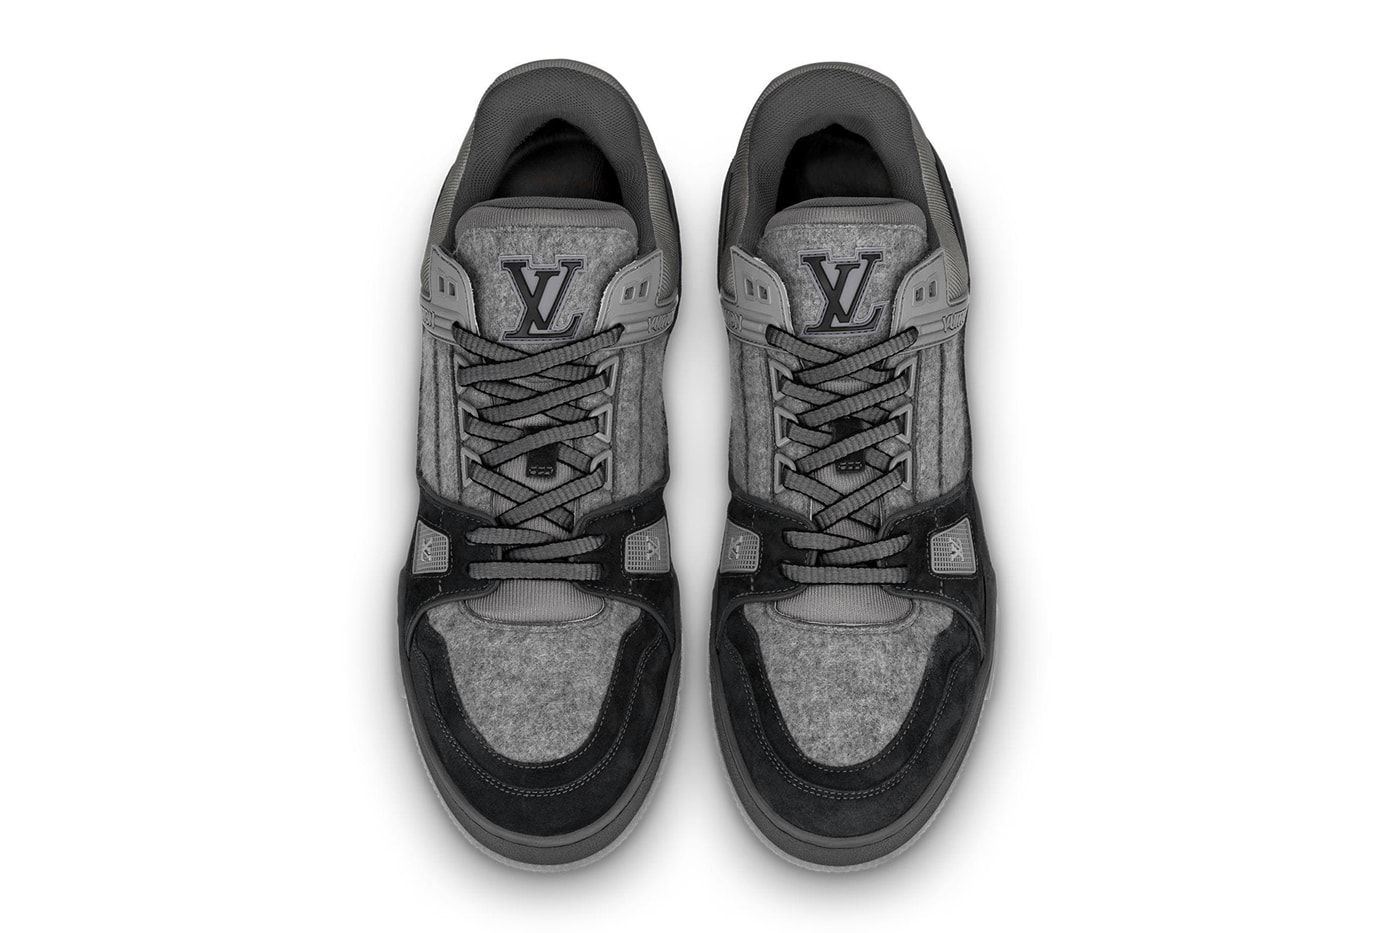 Louis Vuitton Drops Two Versions of LV 408 Sneakers rouge noir suede flannel calf leather low-top virgil abloh fall/winter 2019 buy now price release info 